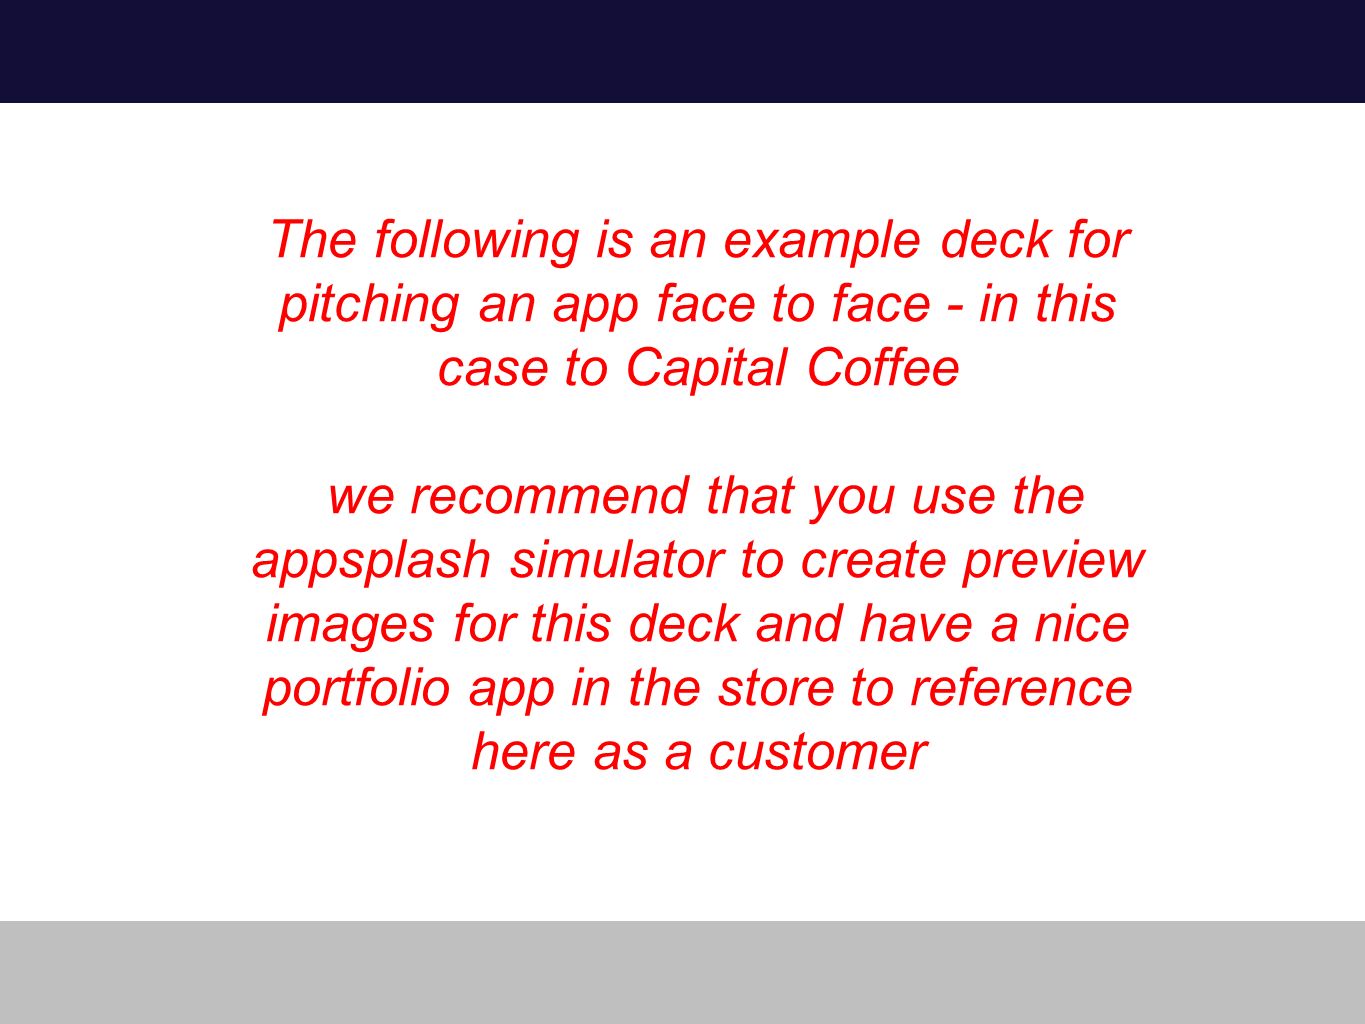 The following is an example deck for pitching an app face to face - in this case to Capital Coffee we recommend that you use the appsplash simulator to create preview images for this deck and have a nice portfolio app in the store to reference here as a customer